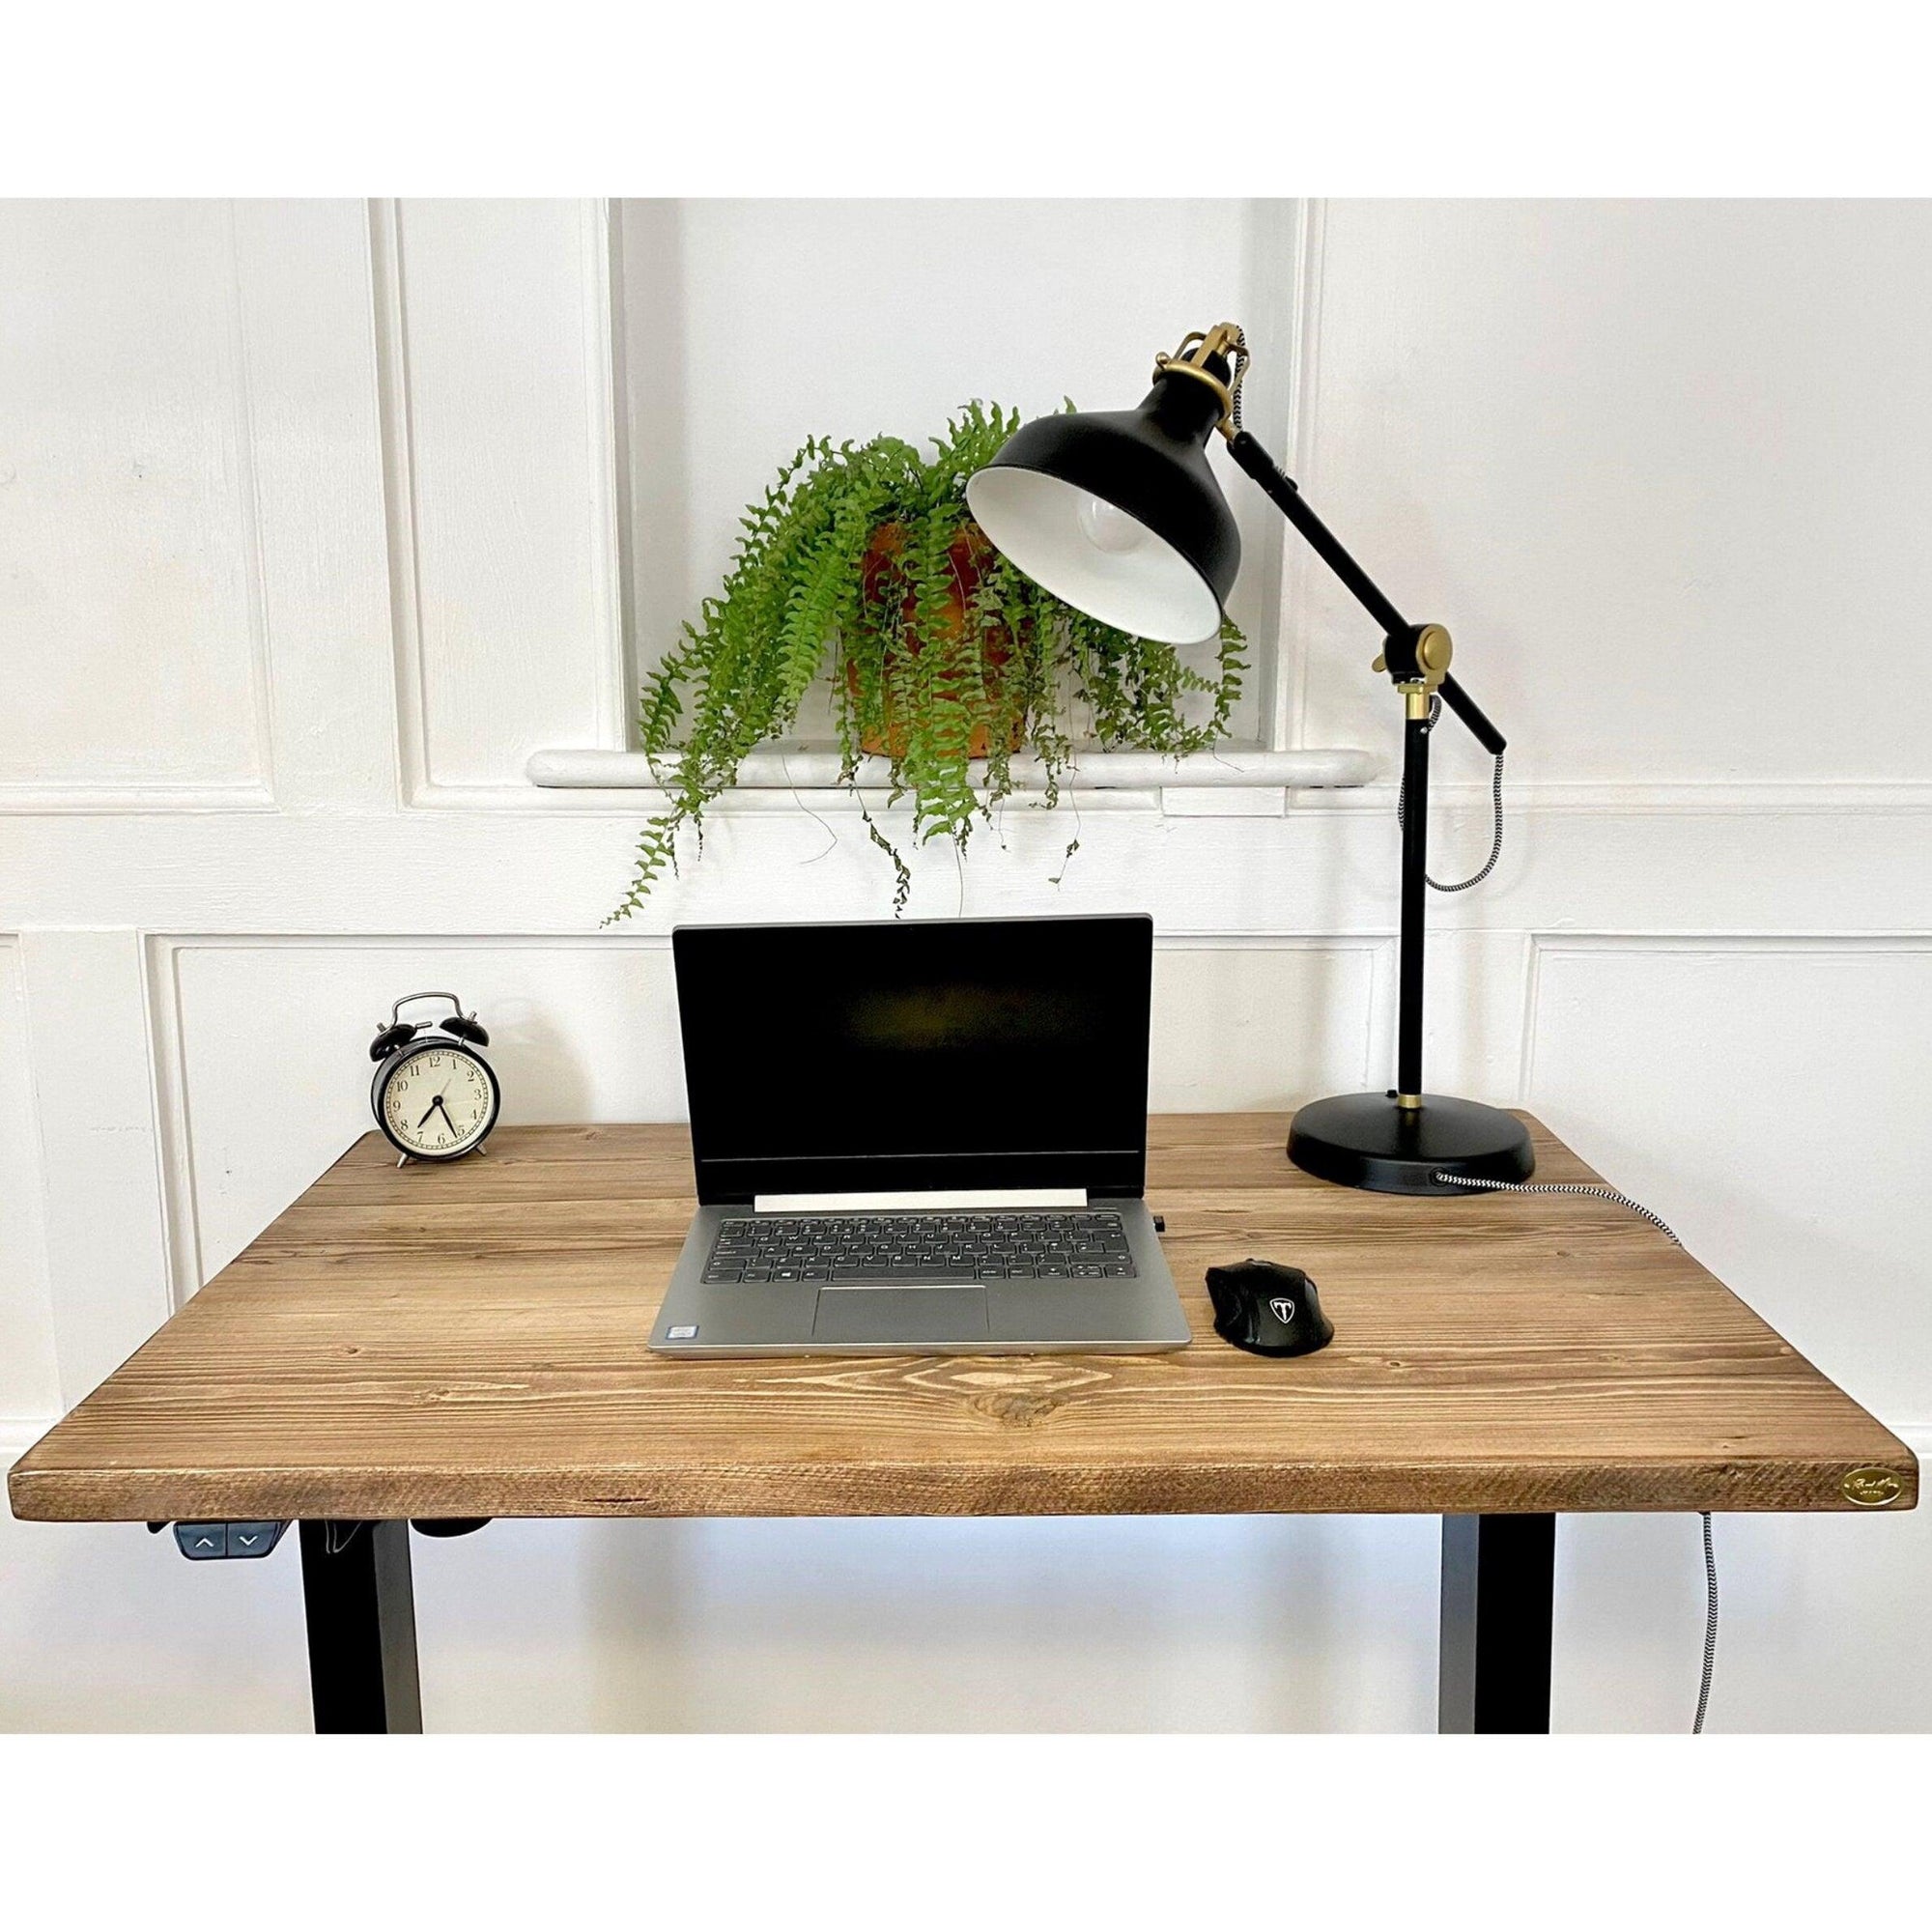 Height Adjustable Sit-Stand Desk with Reclaimed Wooden Top, CUSTOMISABLE